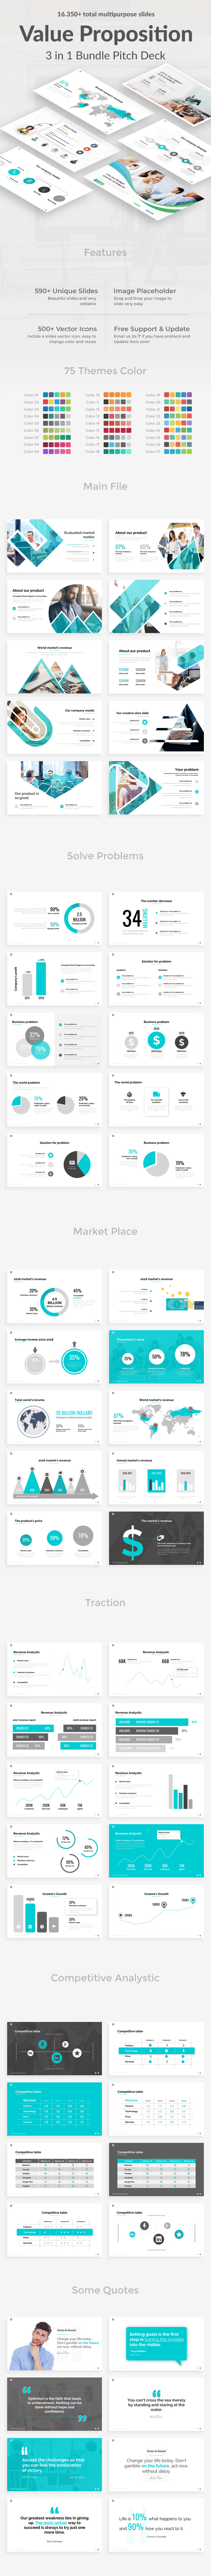 Value Proposition 3 in 1 Pitch Deck Bundle Powerpoint Template